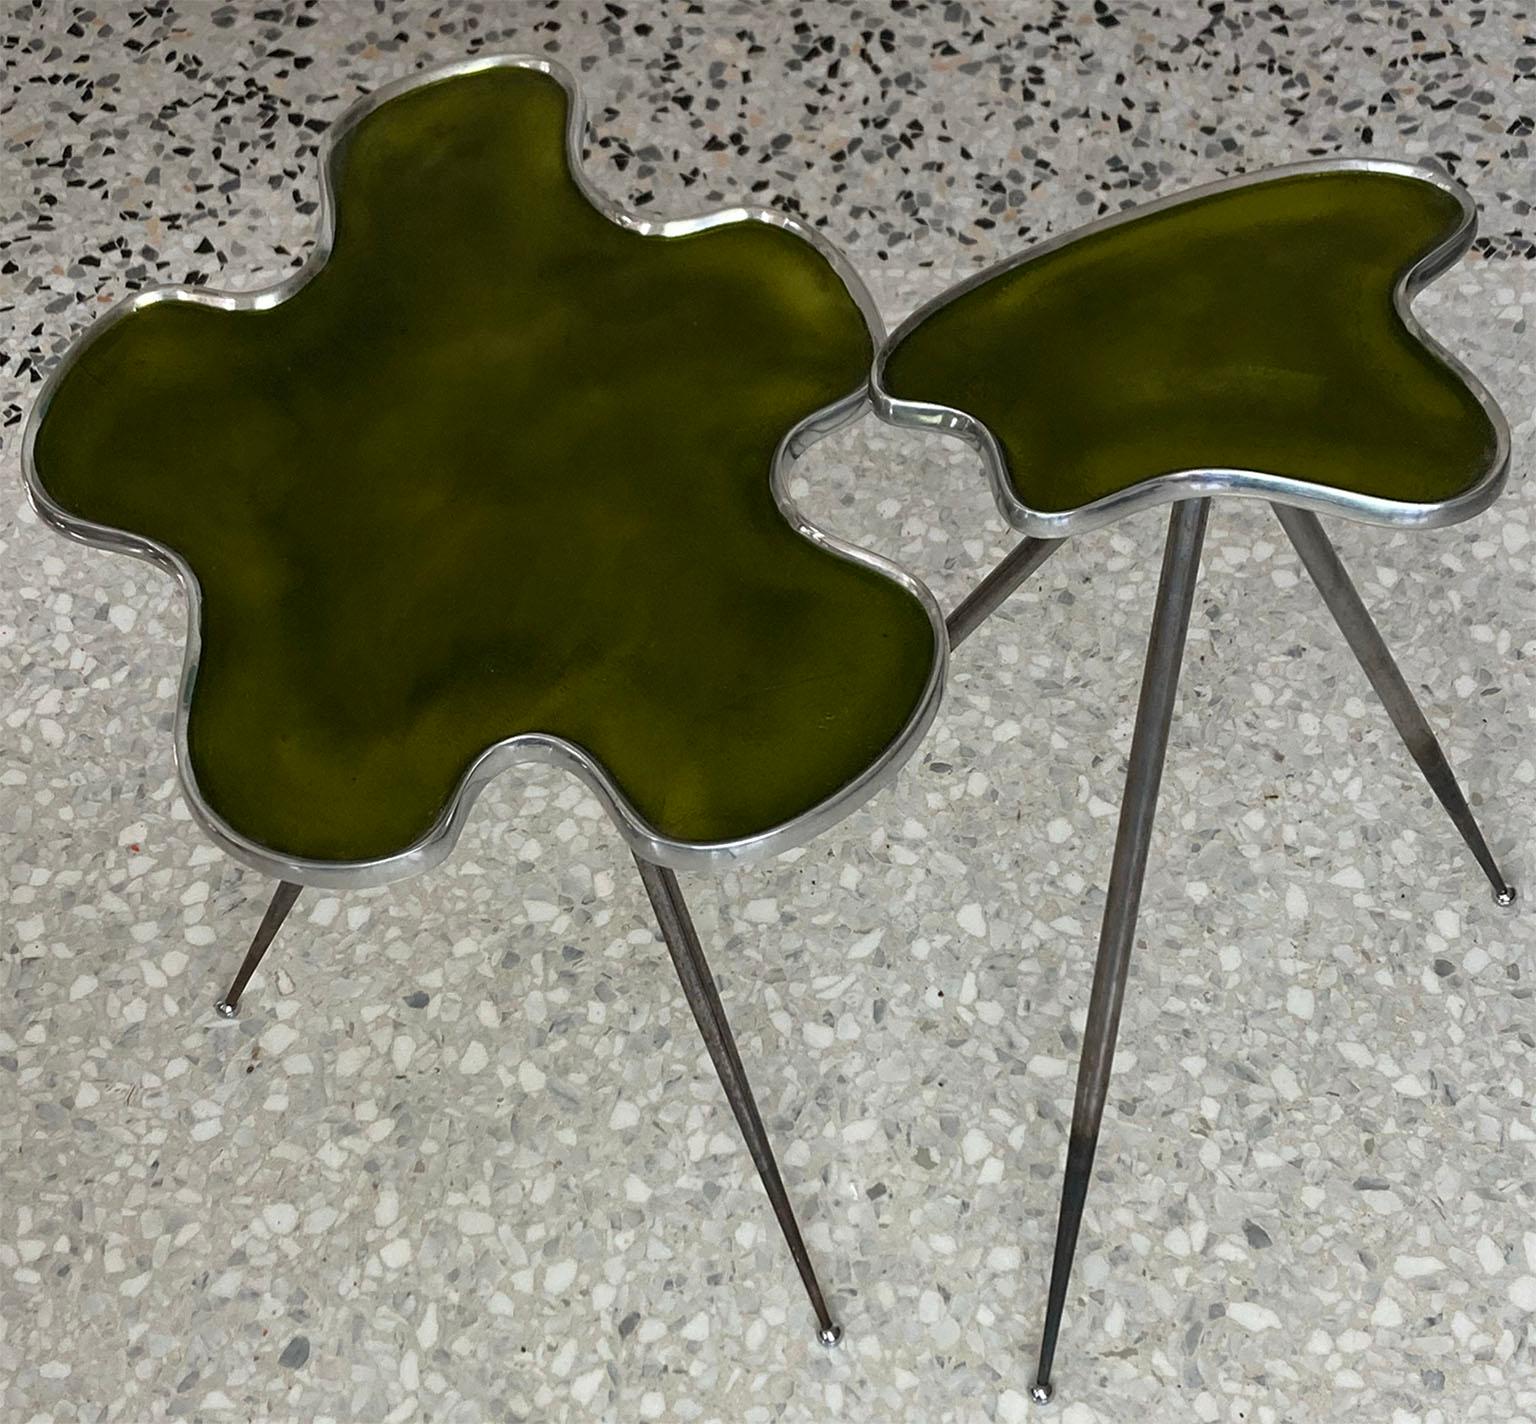 Cold-Painted Contemporary Italian Pair of Side Tables with Glossy Green Top on Tripod Leg